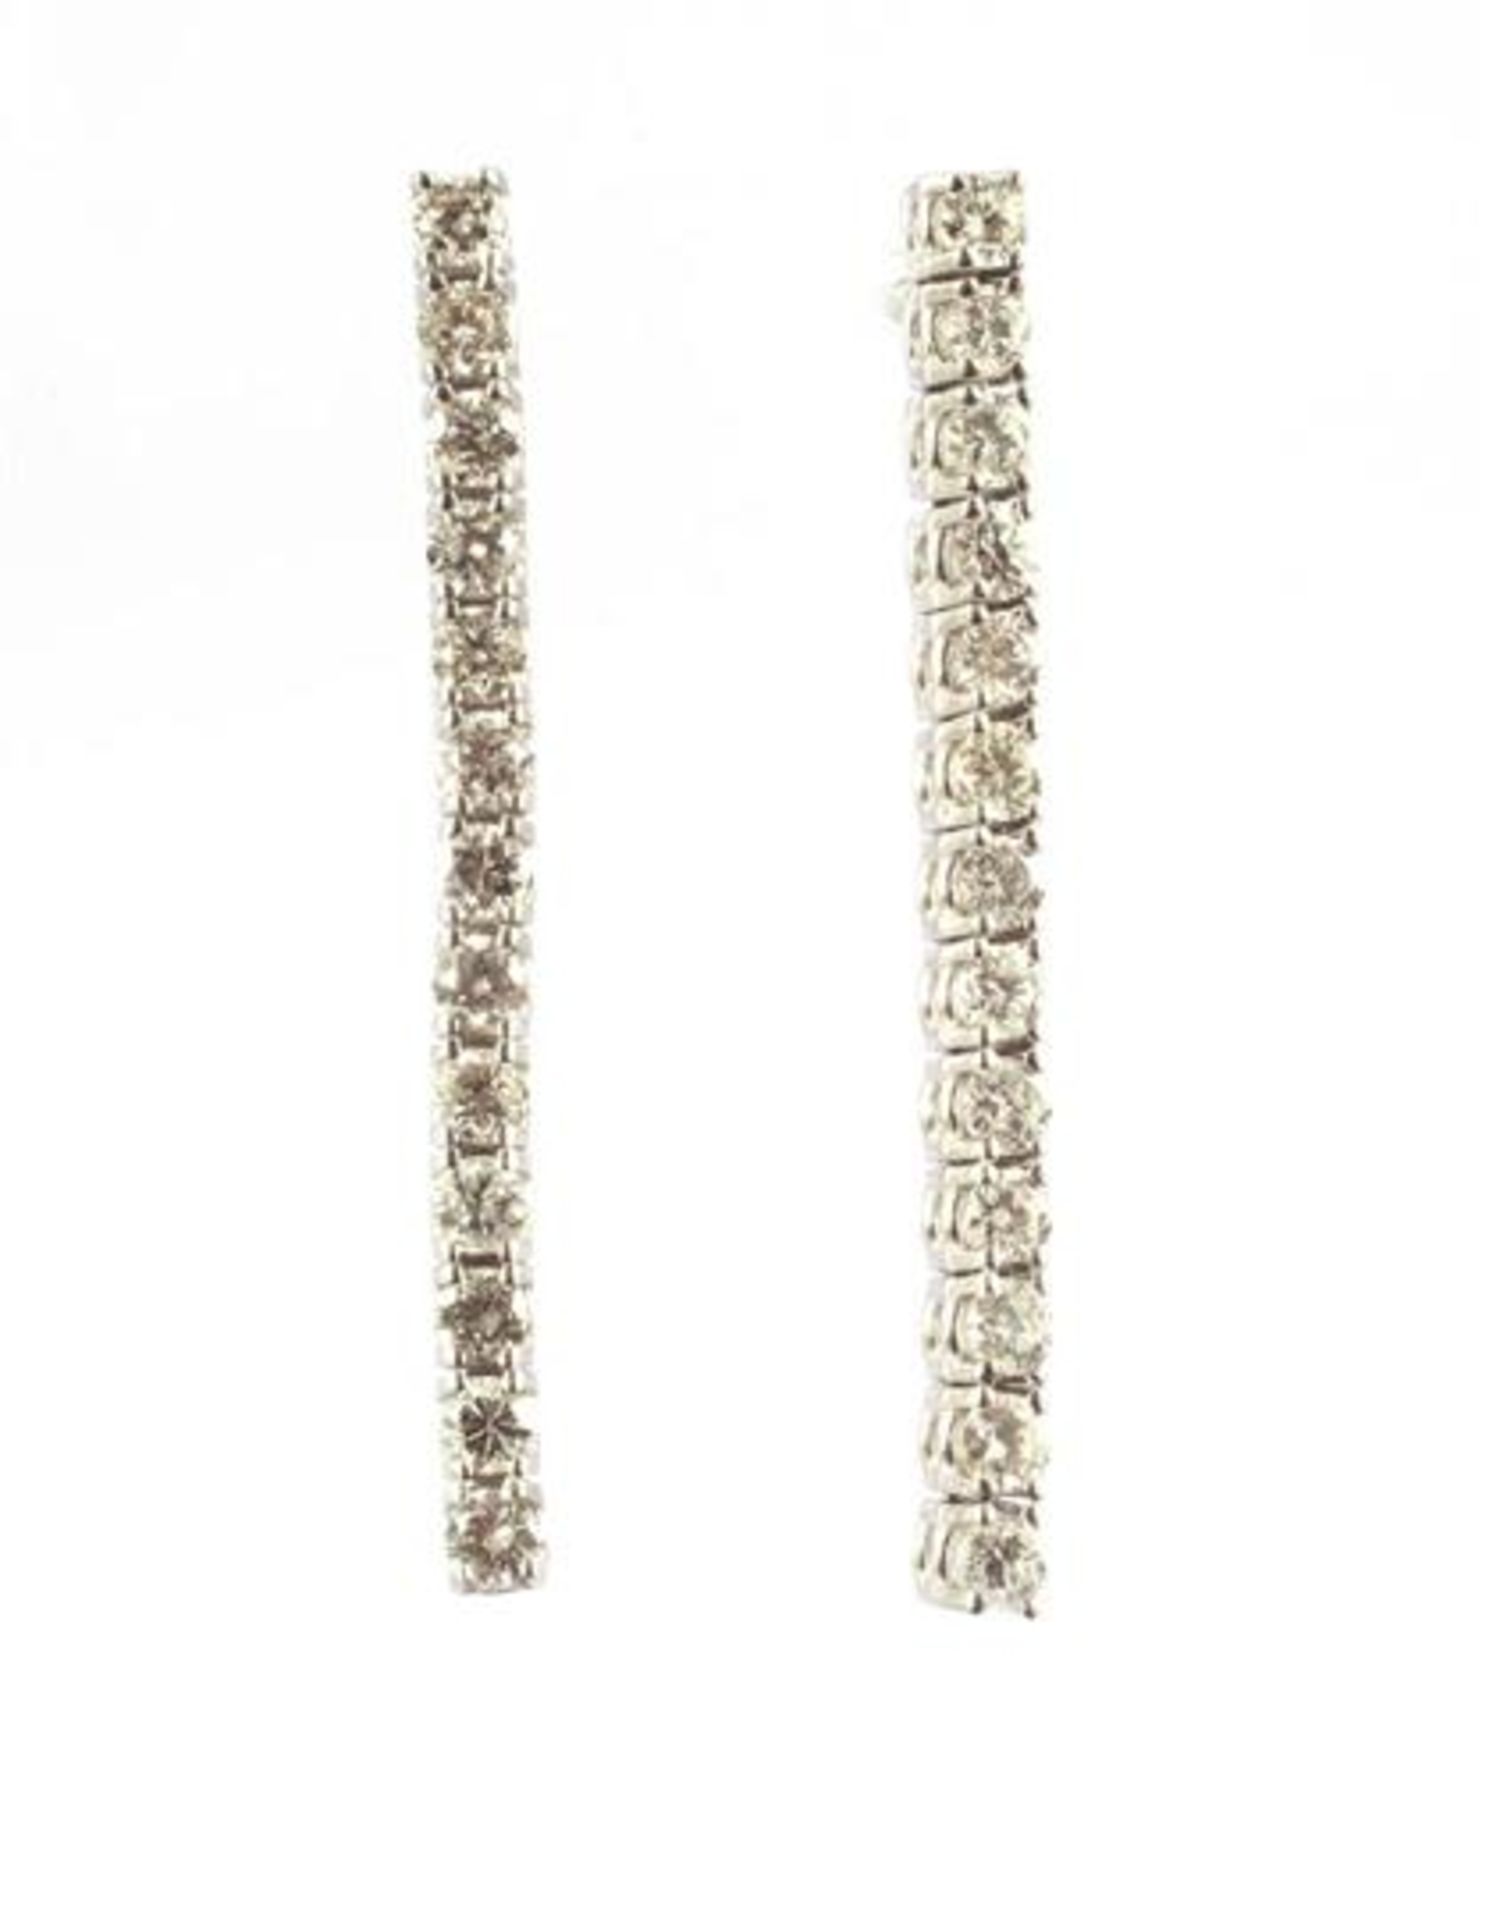 White gold earrings, 18 kt, set with brilliant cut diamond, approx. 0.80 ct.